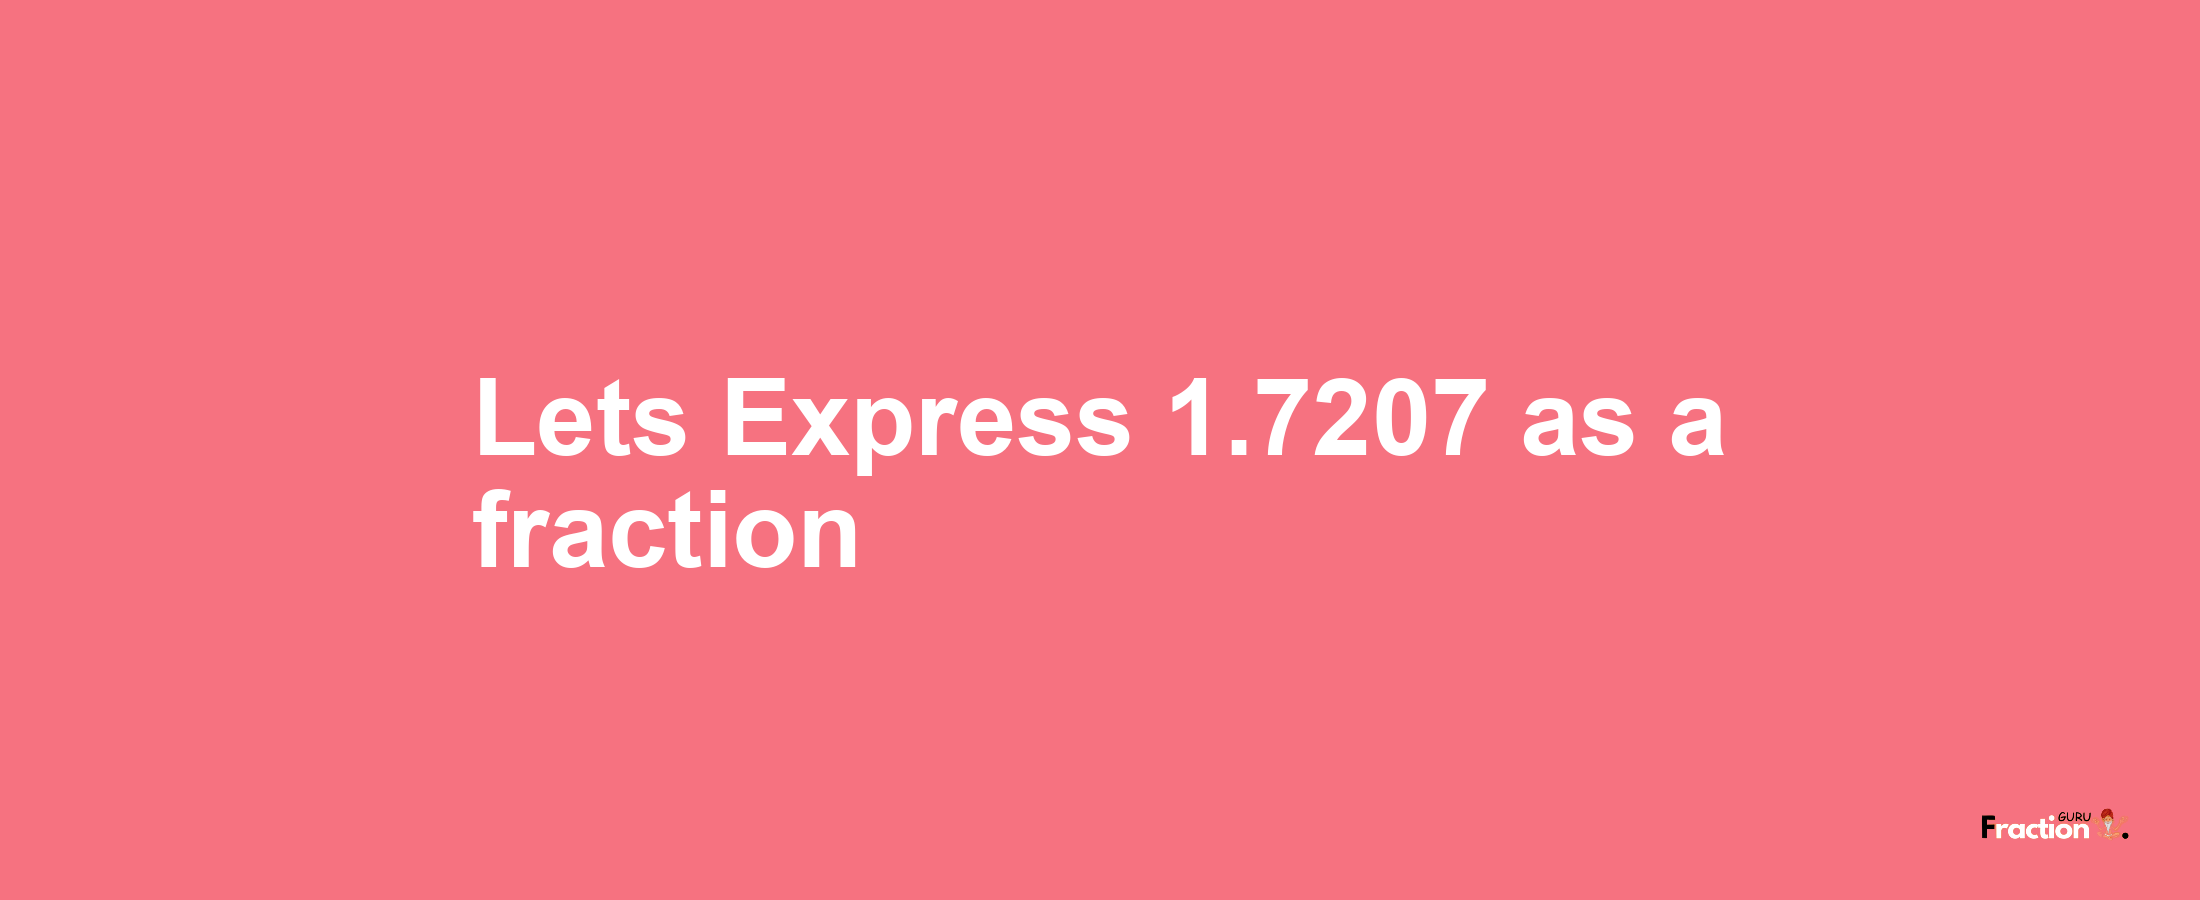 Lets Express 1.7207 as afraction